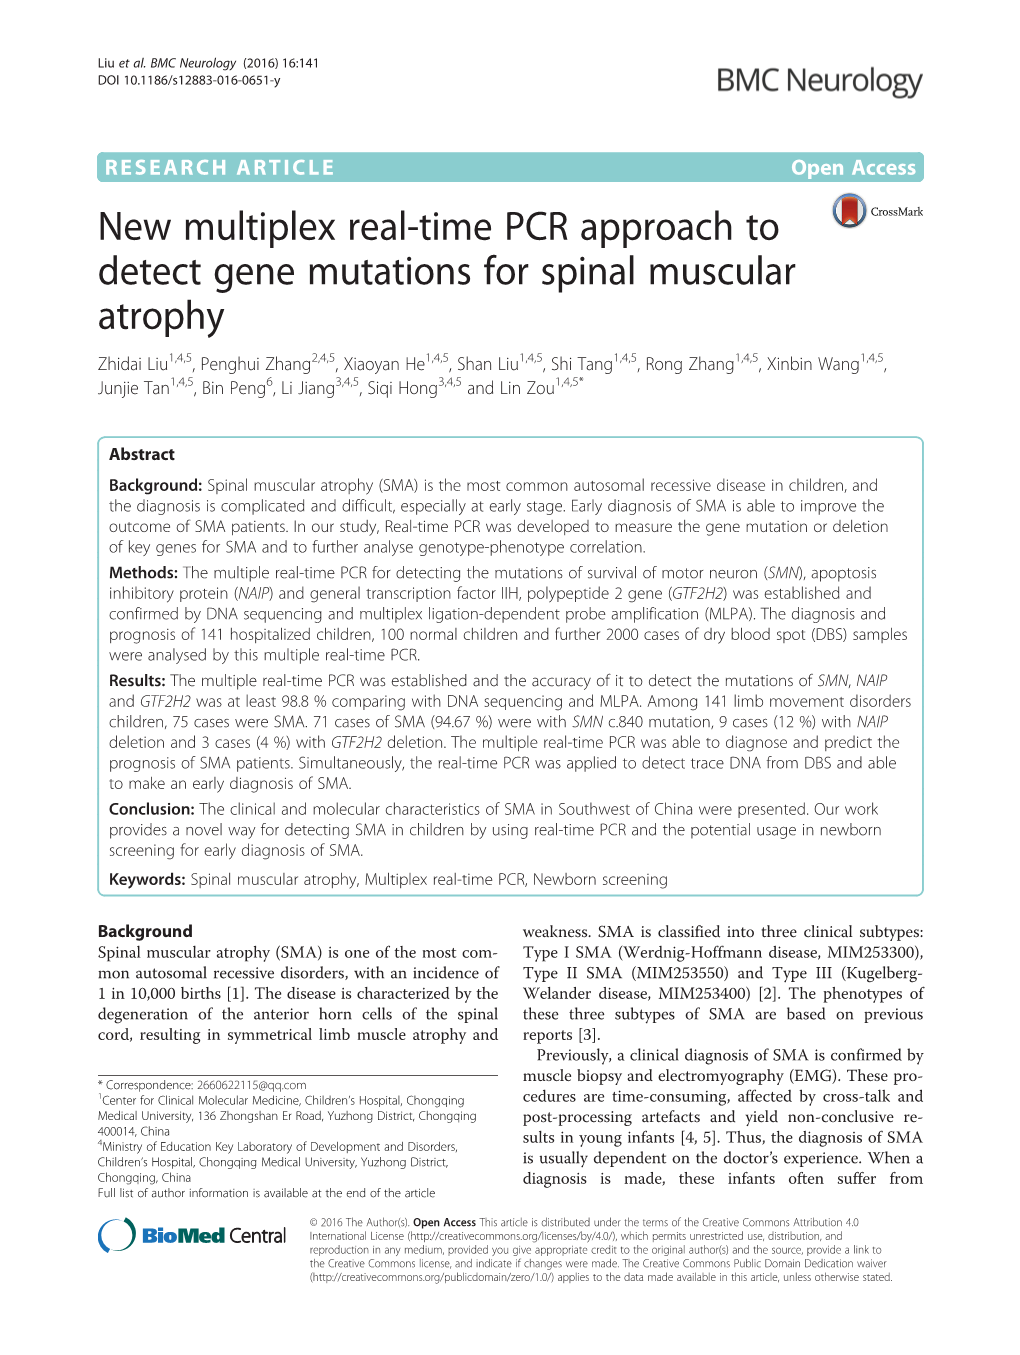 New Multiplex Real-Time PCR Approach to Detect Gene Mutations